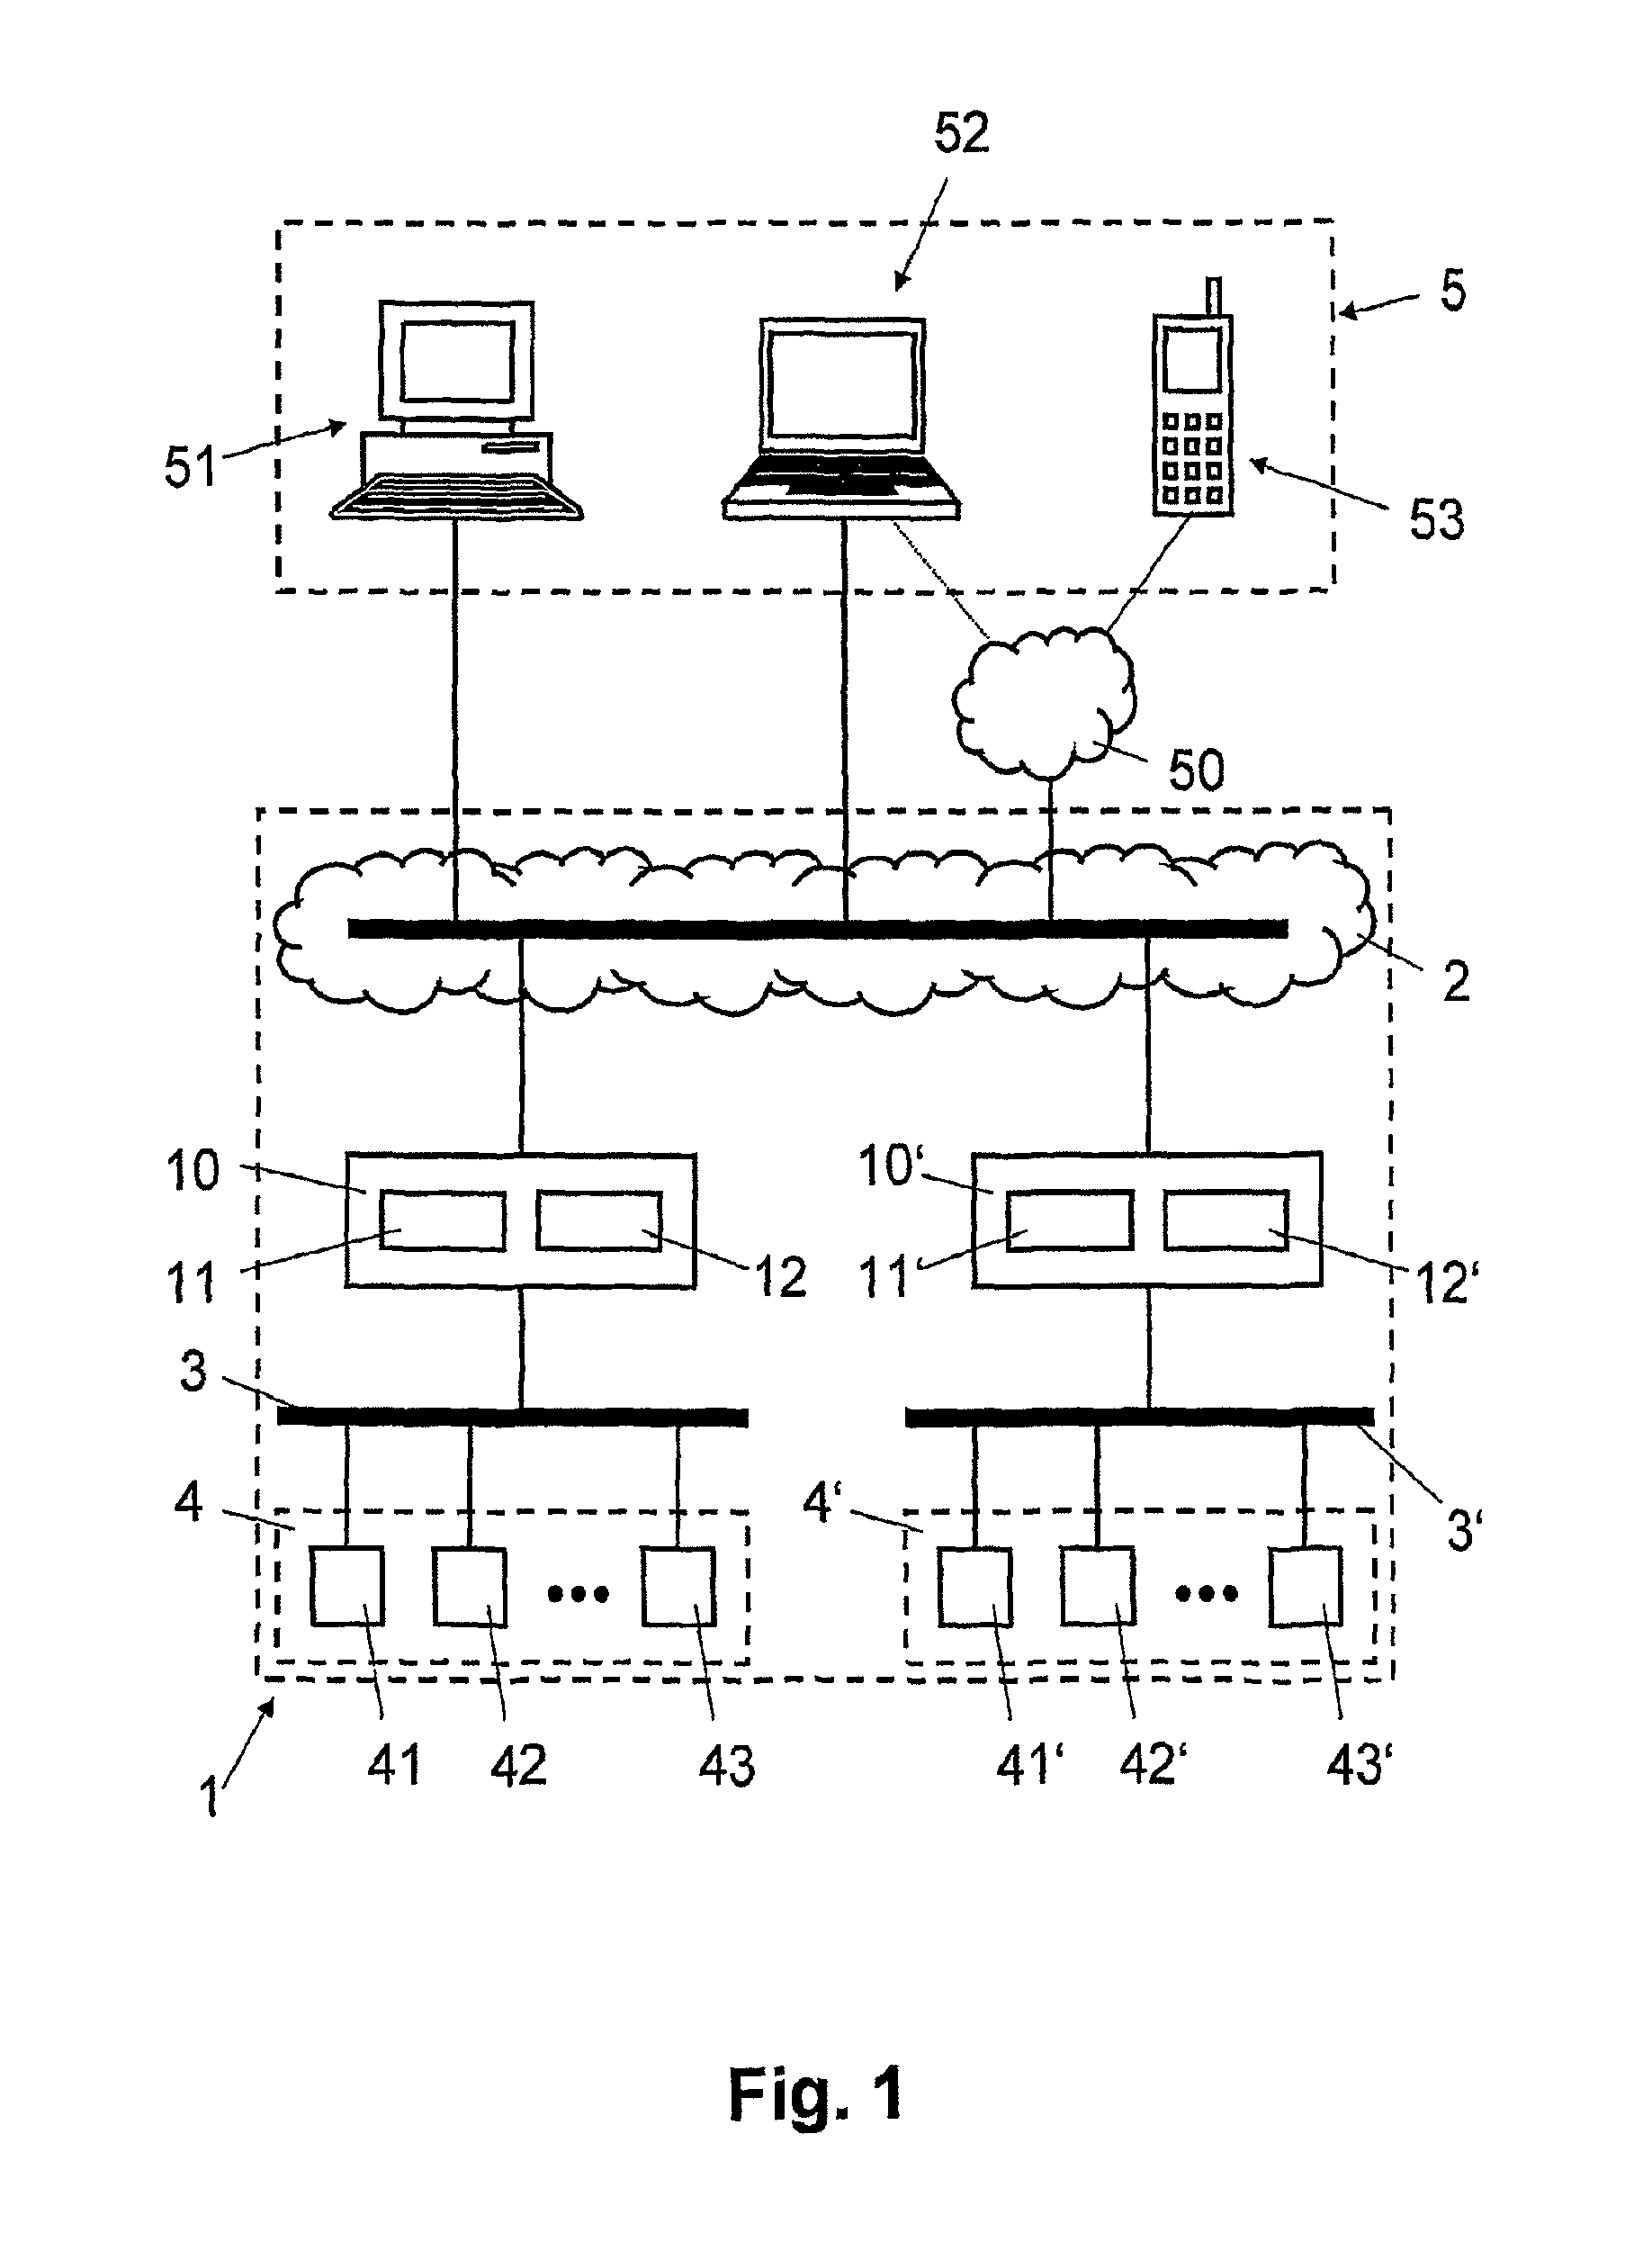 Actuator for HVAC systems and method for operating the actuator